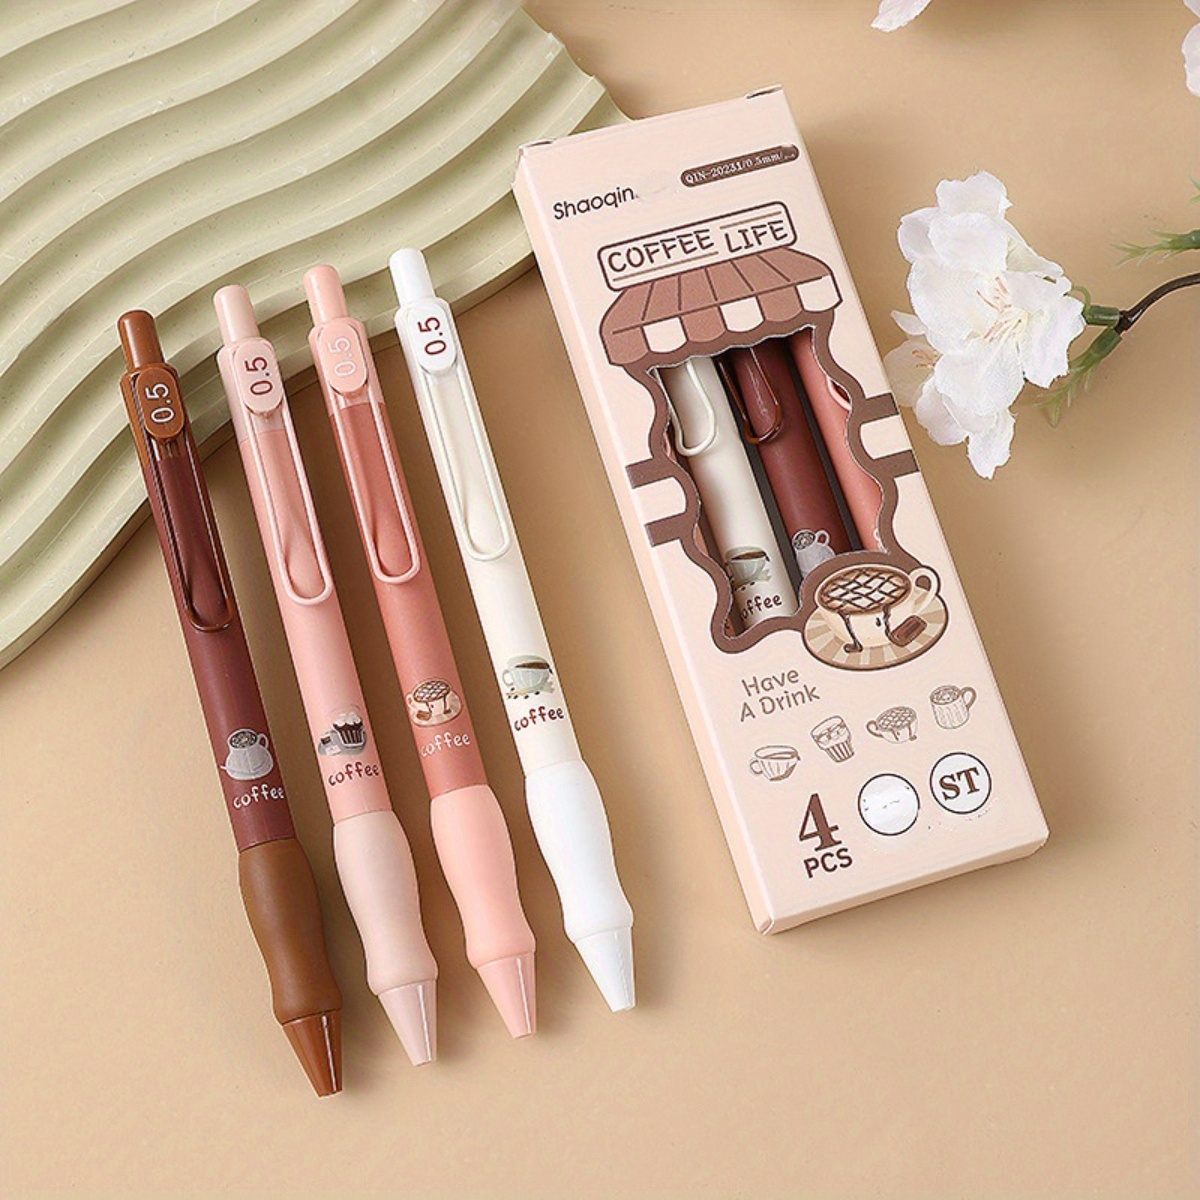 Cute Coffee Soft Bread Gel Pen 4pcs/set 0.5mm Ballpoint Black Color Ink Pens Kawaii Stationary for Office School Supplies Gifts